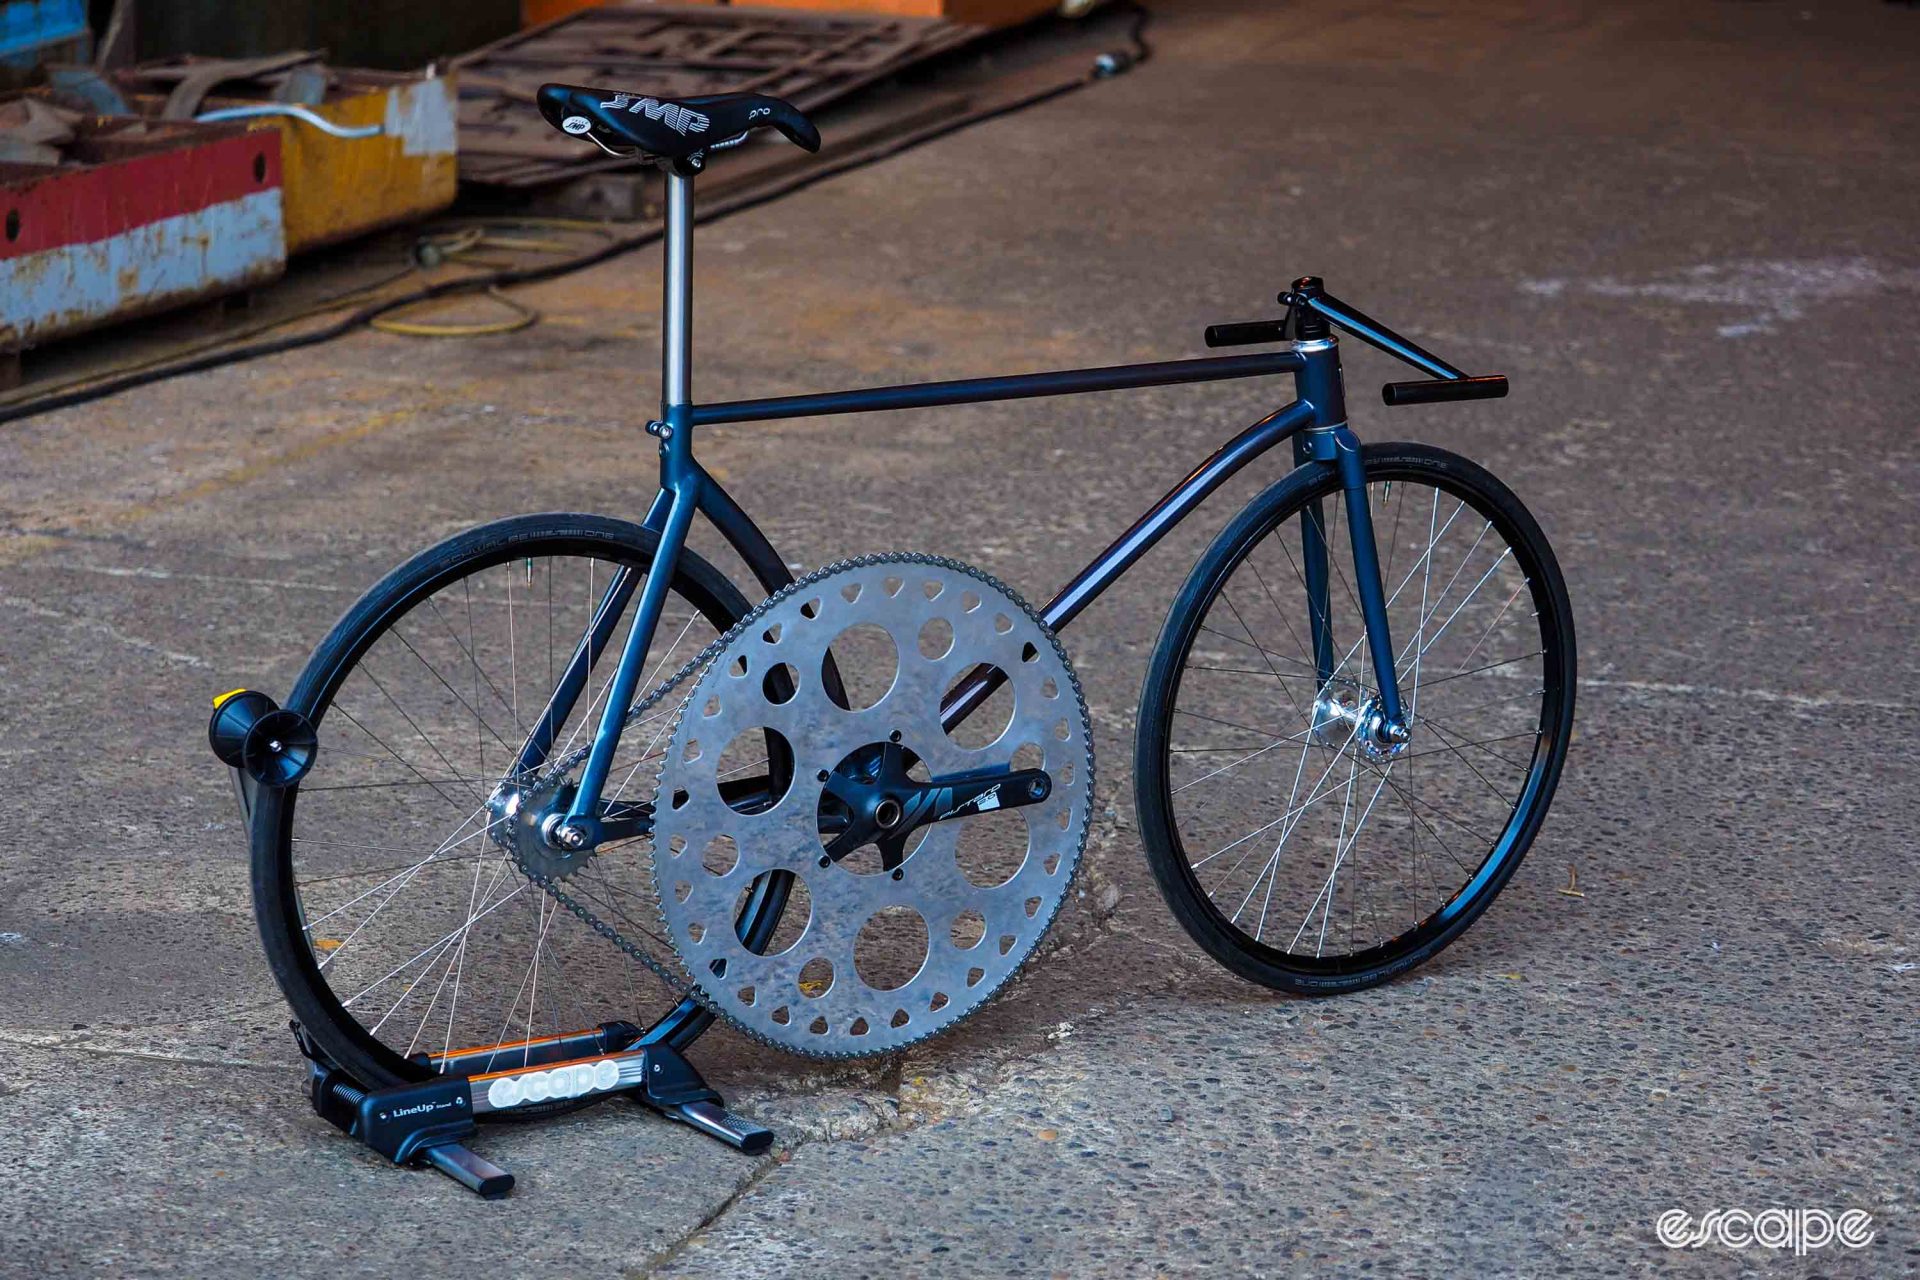 Profile shot of Brulé track bike, with a chainring almost the same size as the wheels.